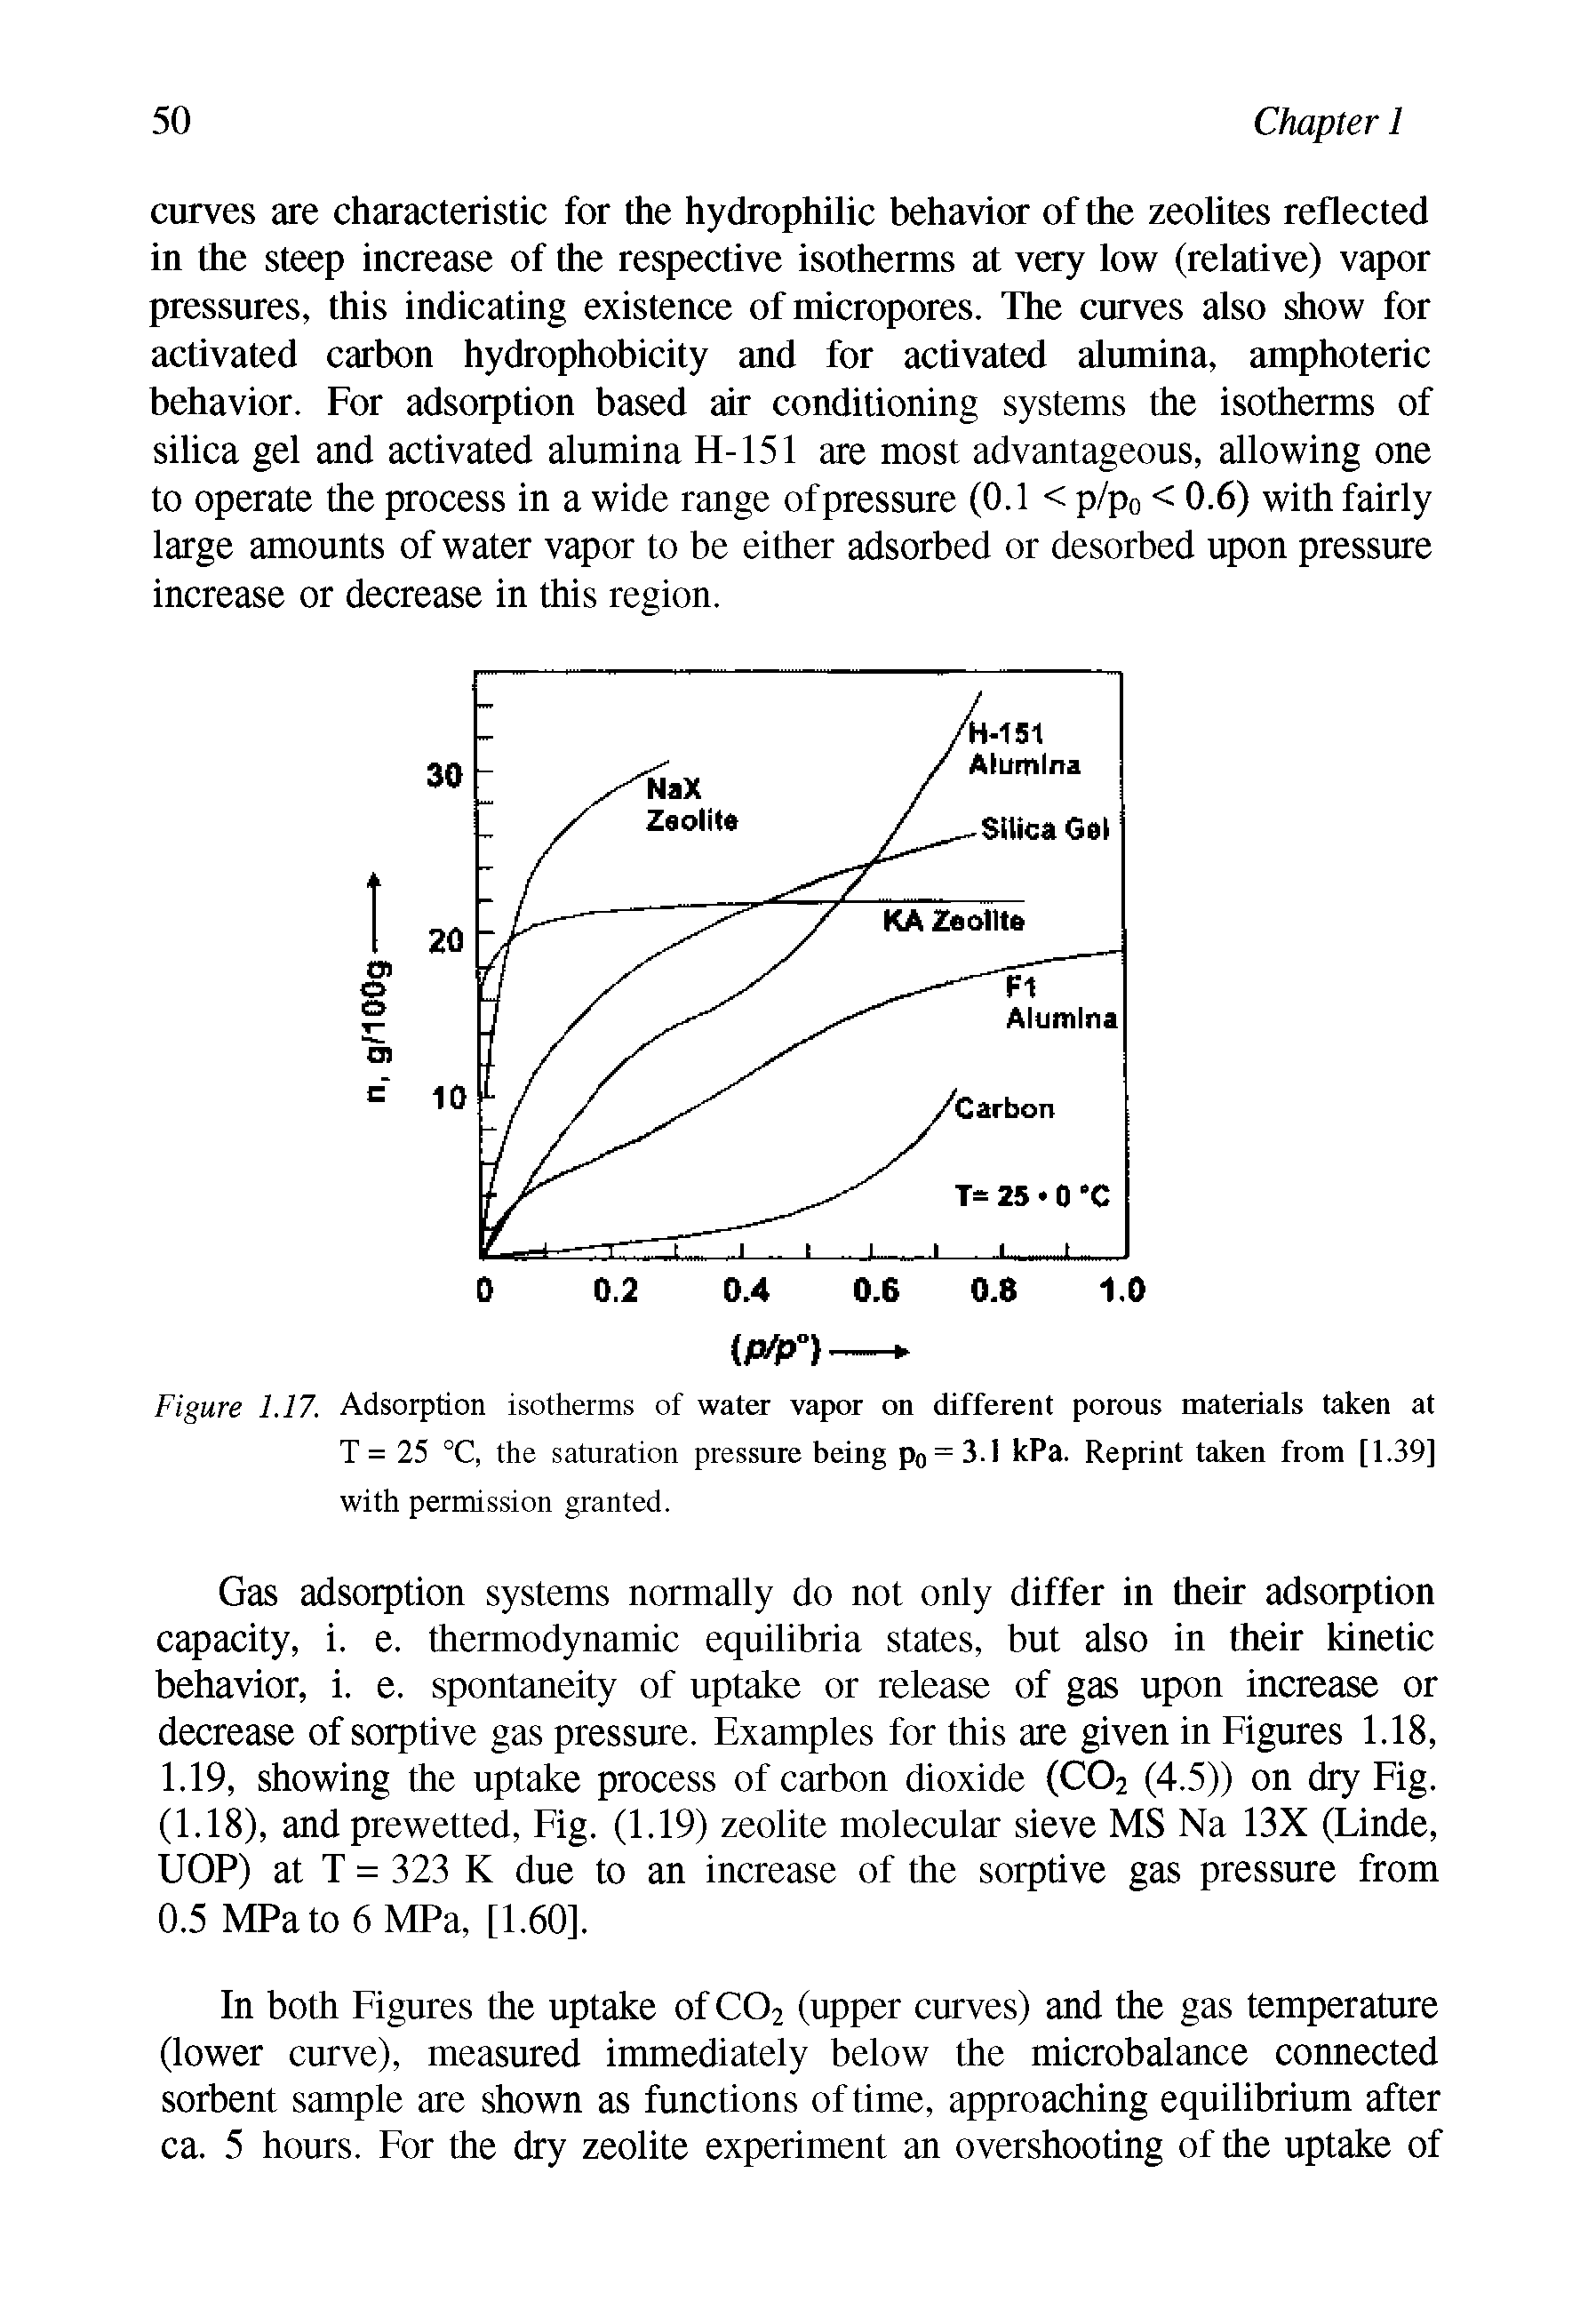 Figure 1.17. Adsorption isotherms of water vapor on different porous materials taken at T = 25 °C, the saturation pressure being po = 3.1 kPa. Reprint taken from 11.39] with permission granted.